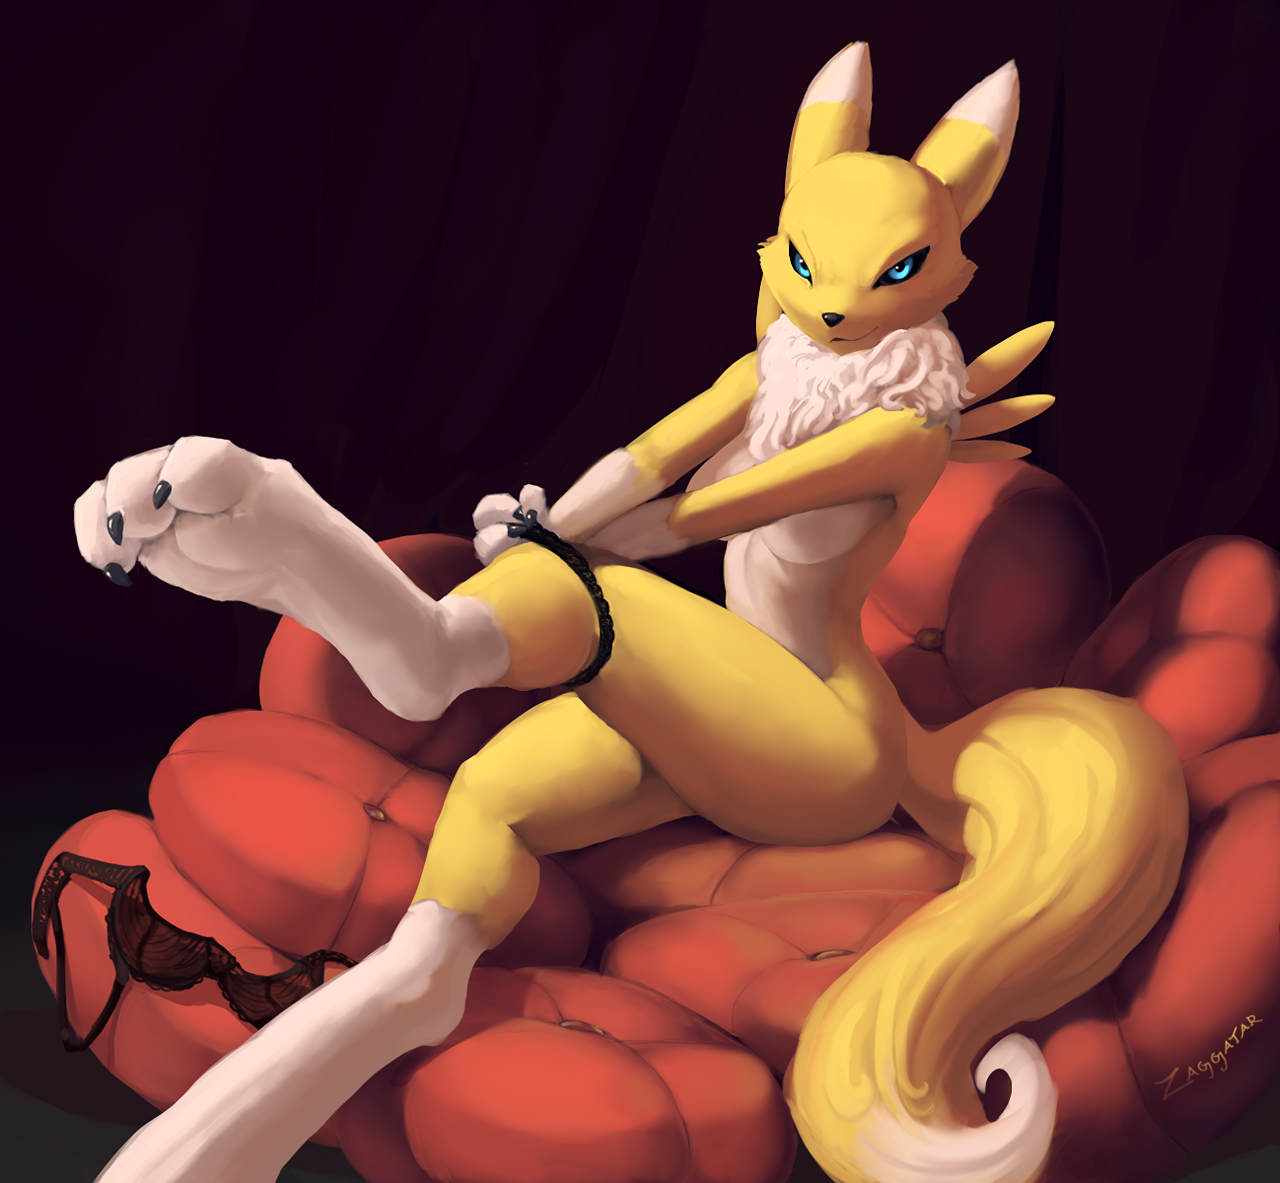 Ychan - r - renamon cant find the source of this one - 107720